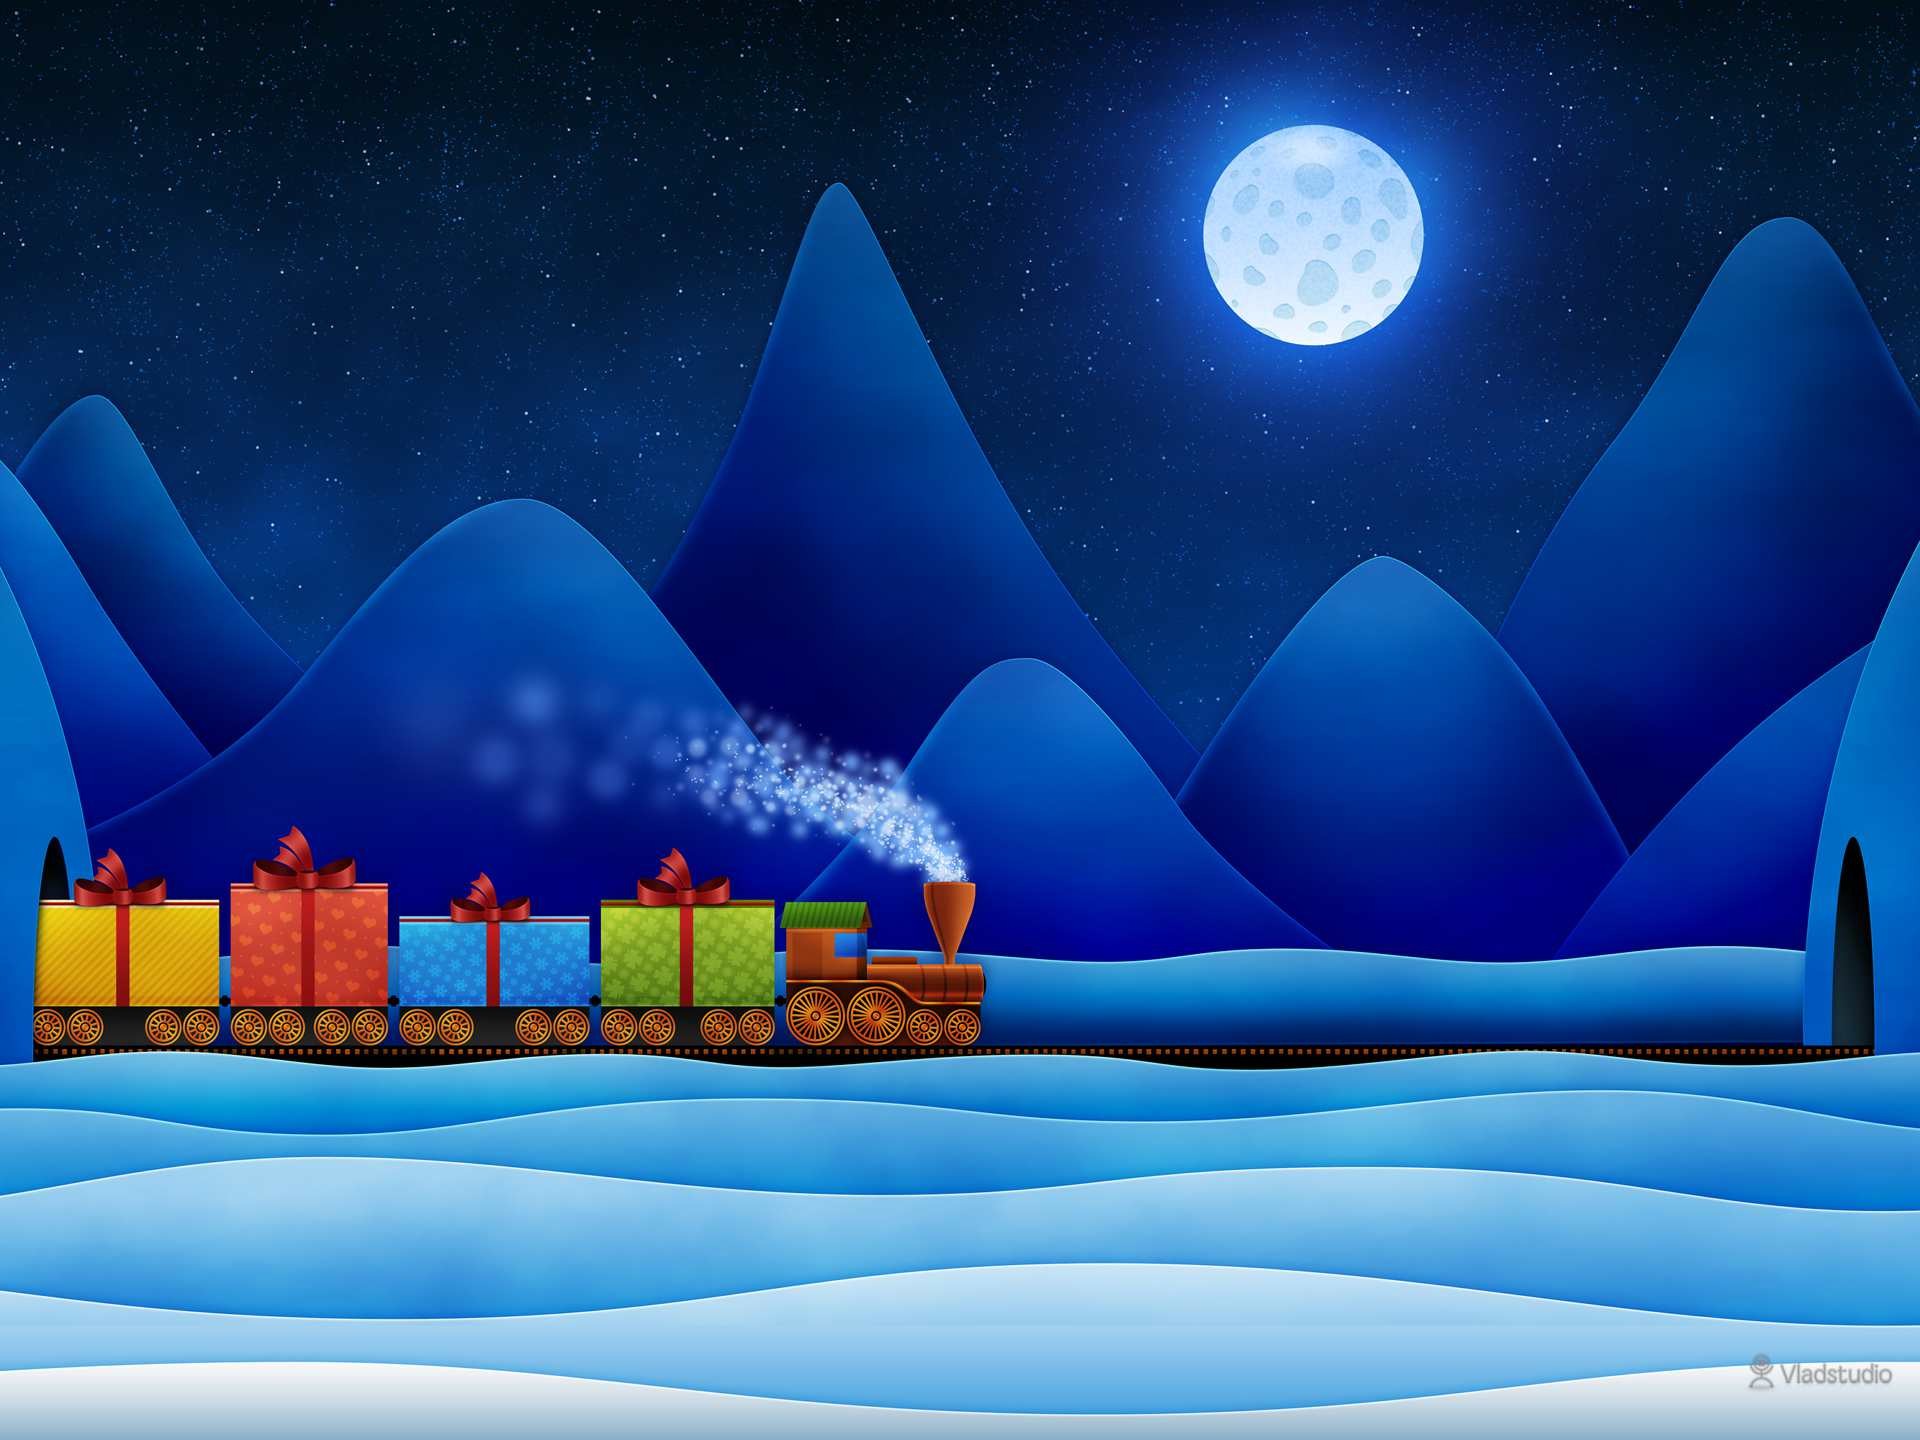 1920x1440 A train carrying gifts